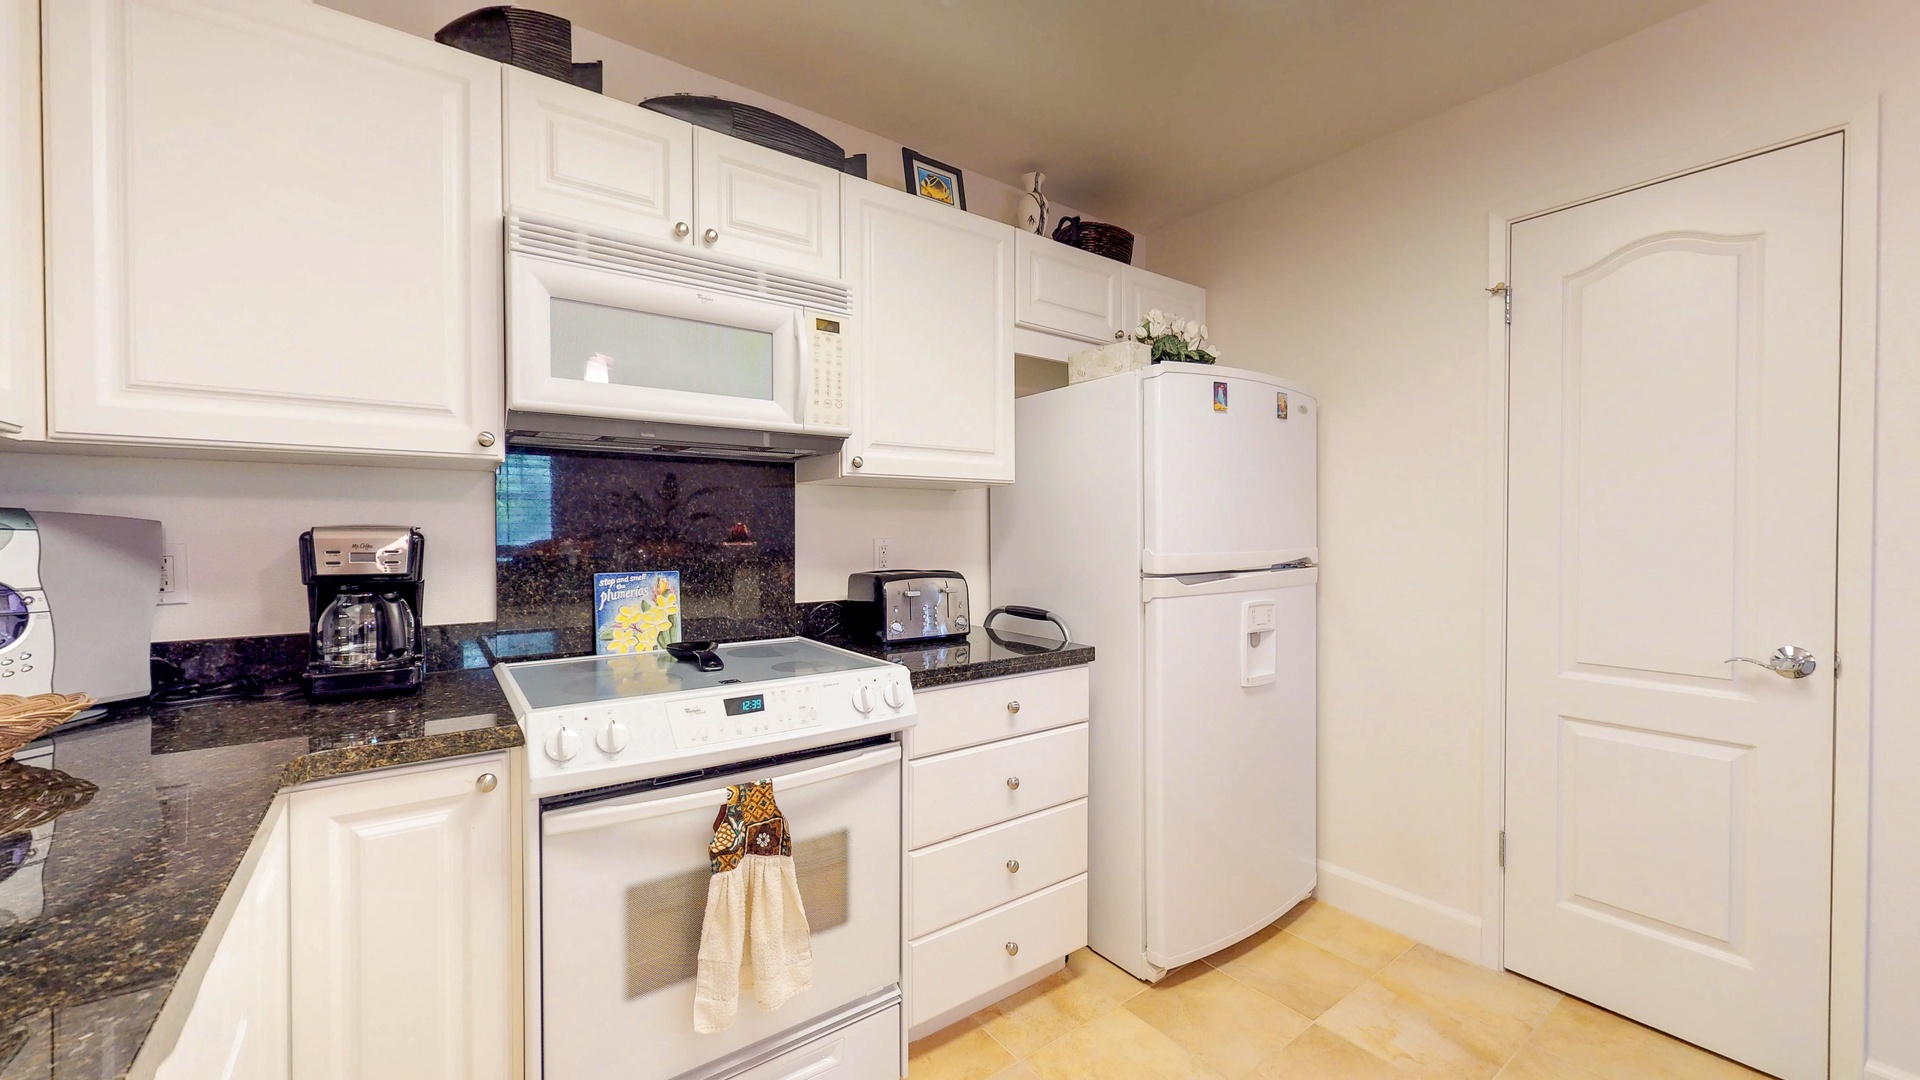 Kapolei Vacation Rentals, Ko Olina Kai 1105E - Functional kitchen equipped with essential appliances and ample storage space.